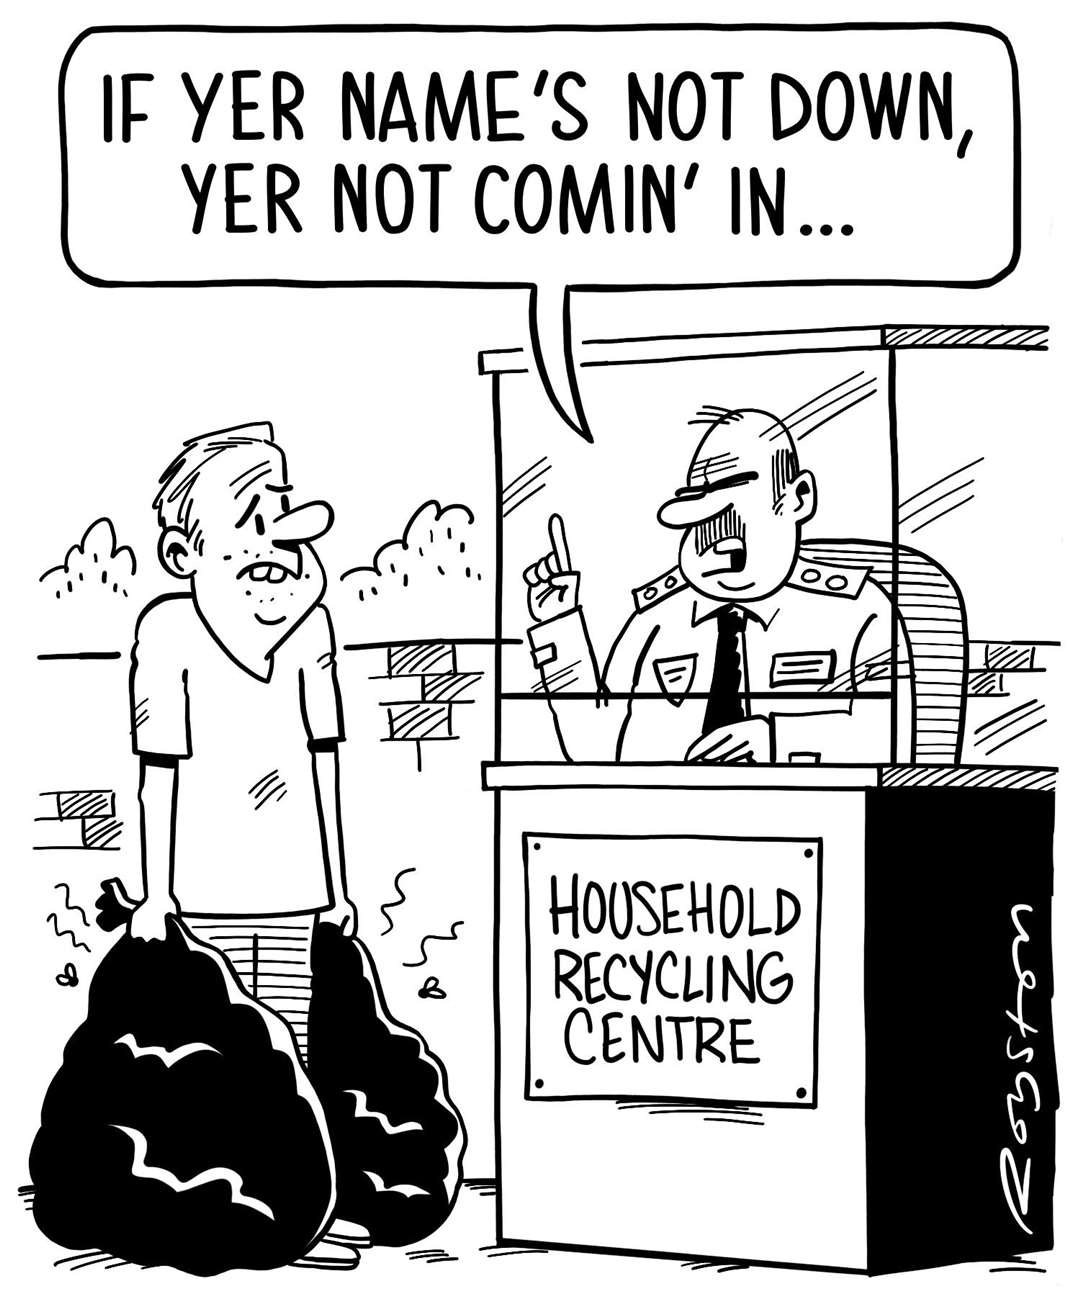 Cartoonist Royston's take on the changes